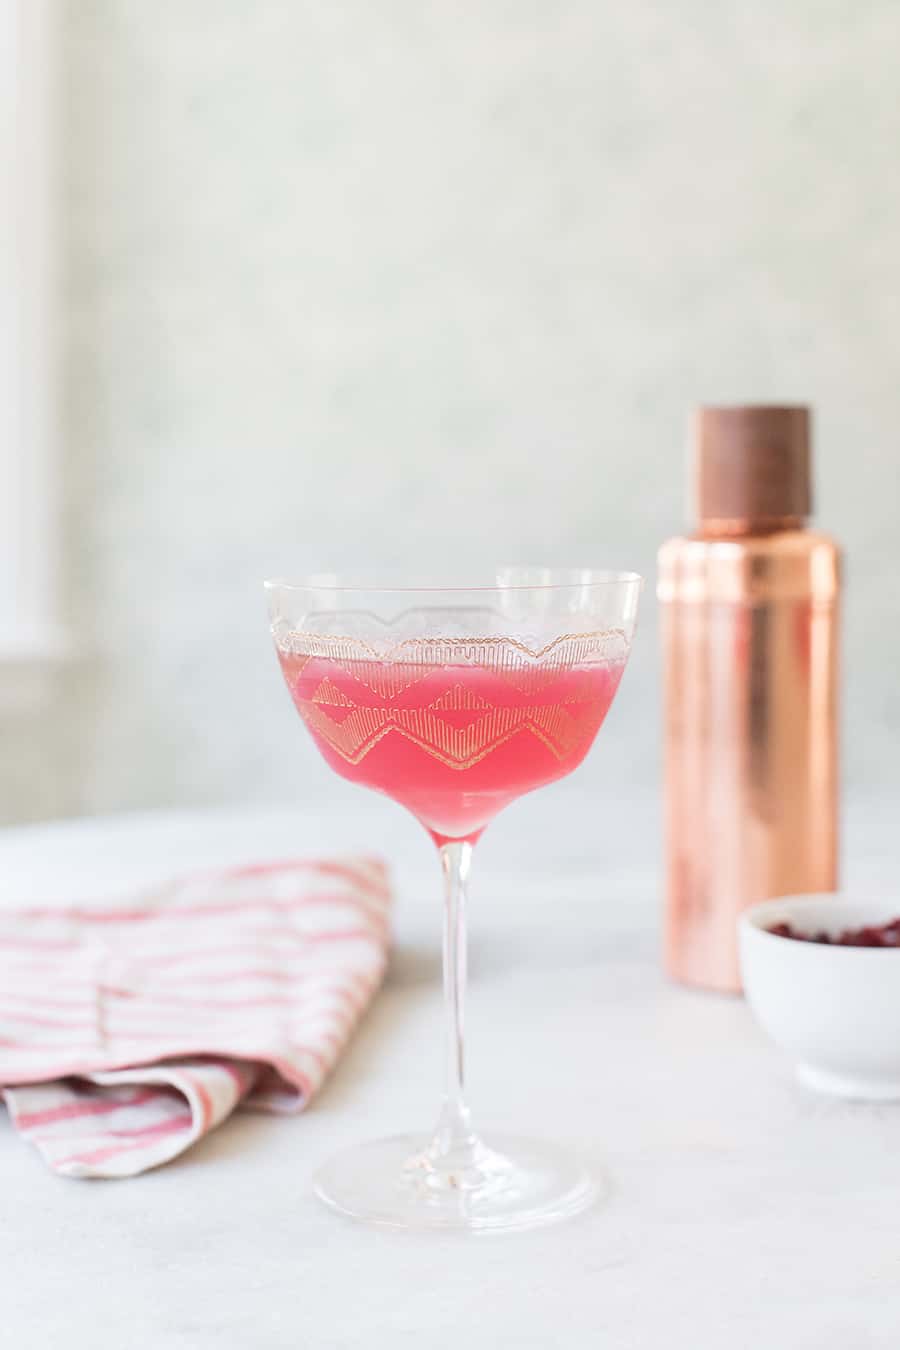 A pink cranberry martini in a gold coupe glass with a copper cocktail shaker - valentine's day cocktails